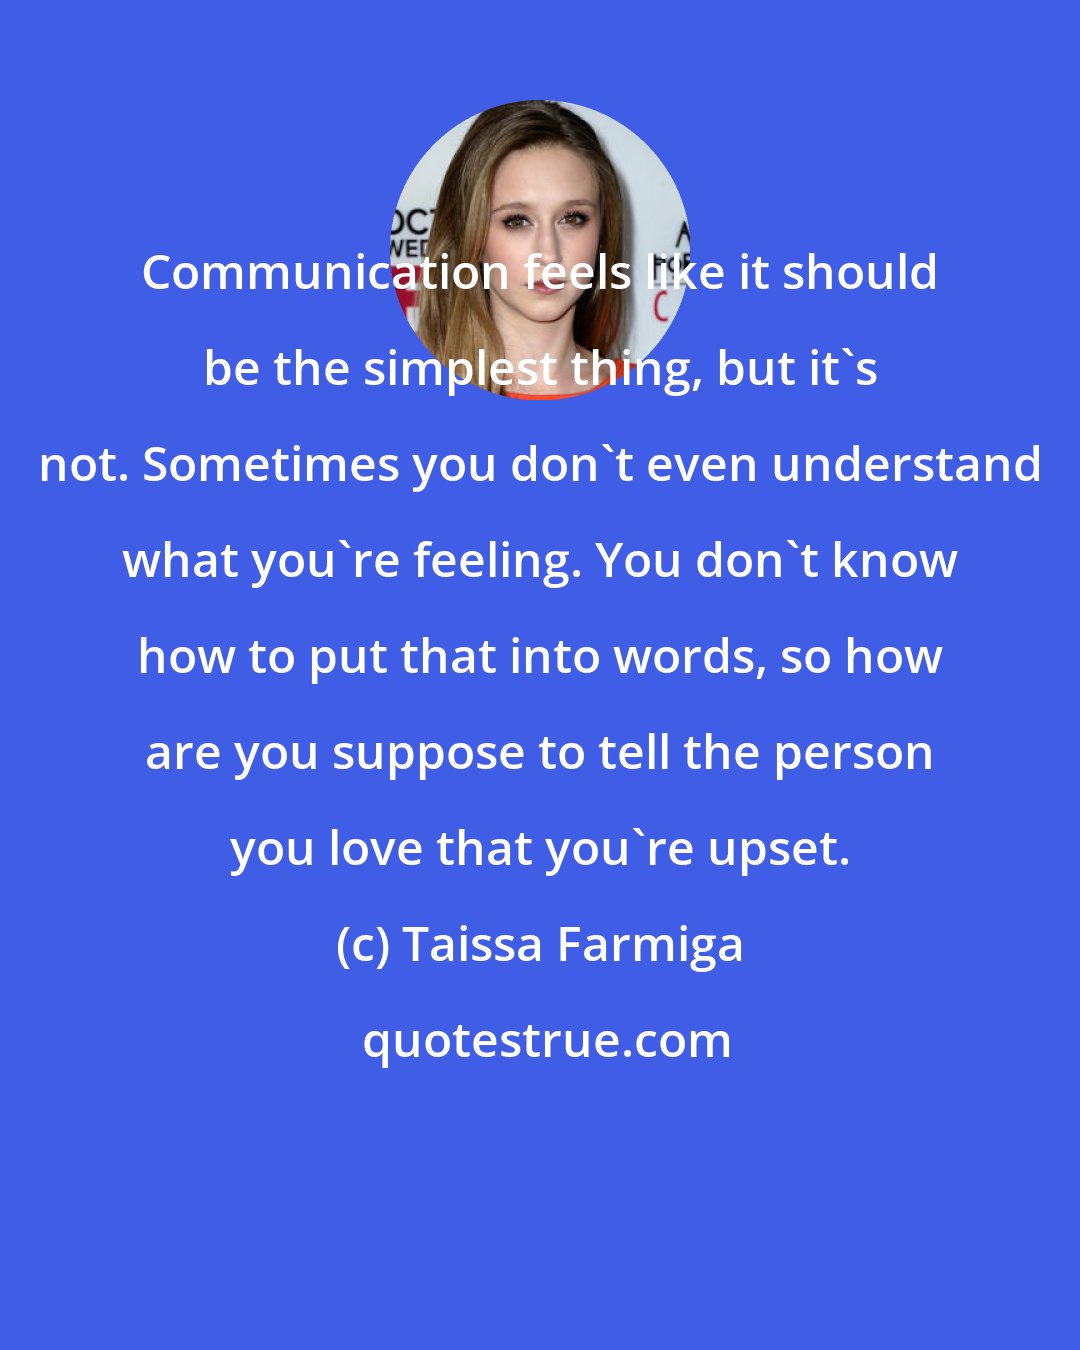 Taissa Farmiga: Communication feels like it should be the simplest thing, but it's not. Sometimes you don't even understand what you're feeling. You don't know how to put that into words, so how are you suppose to tell the person you love that you're upset.